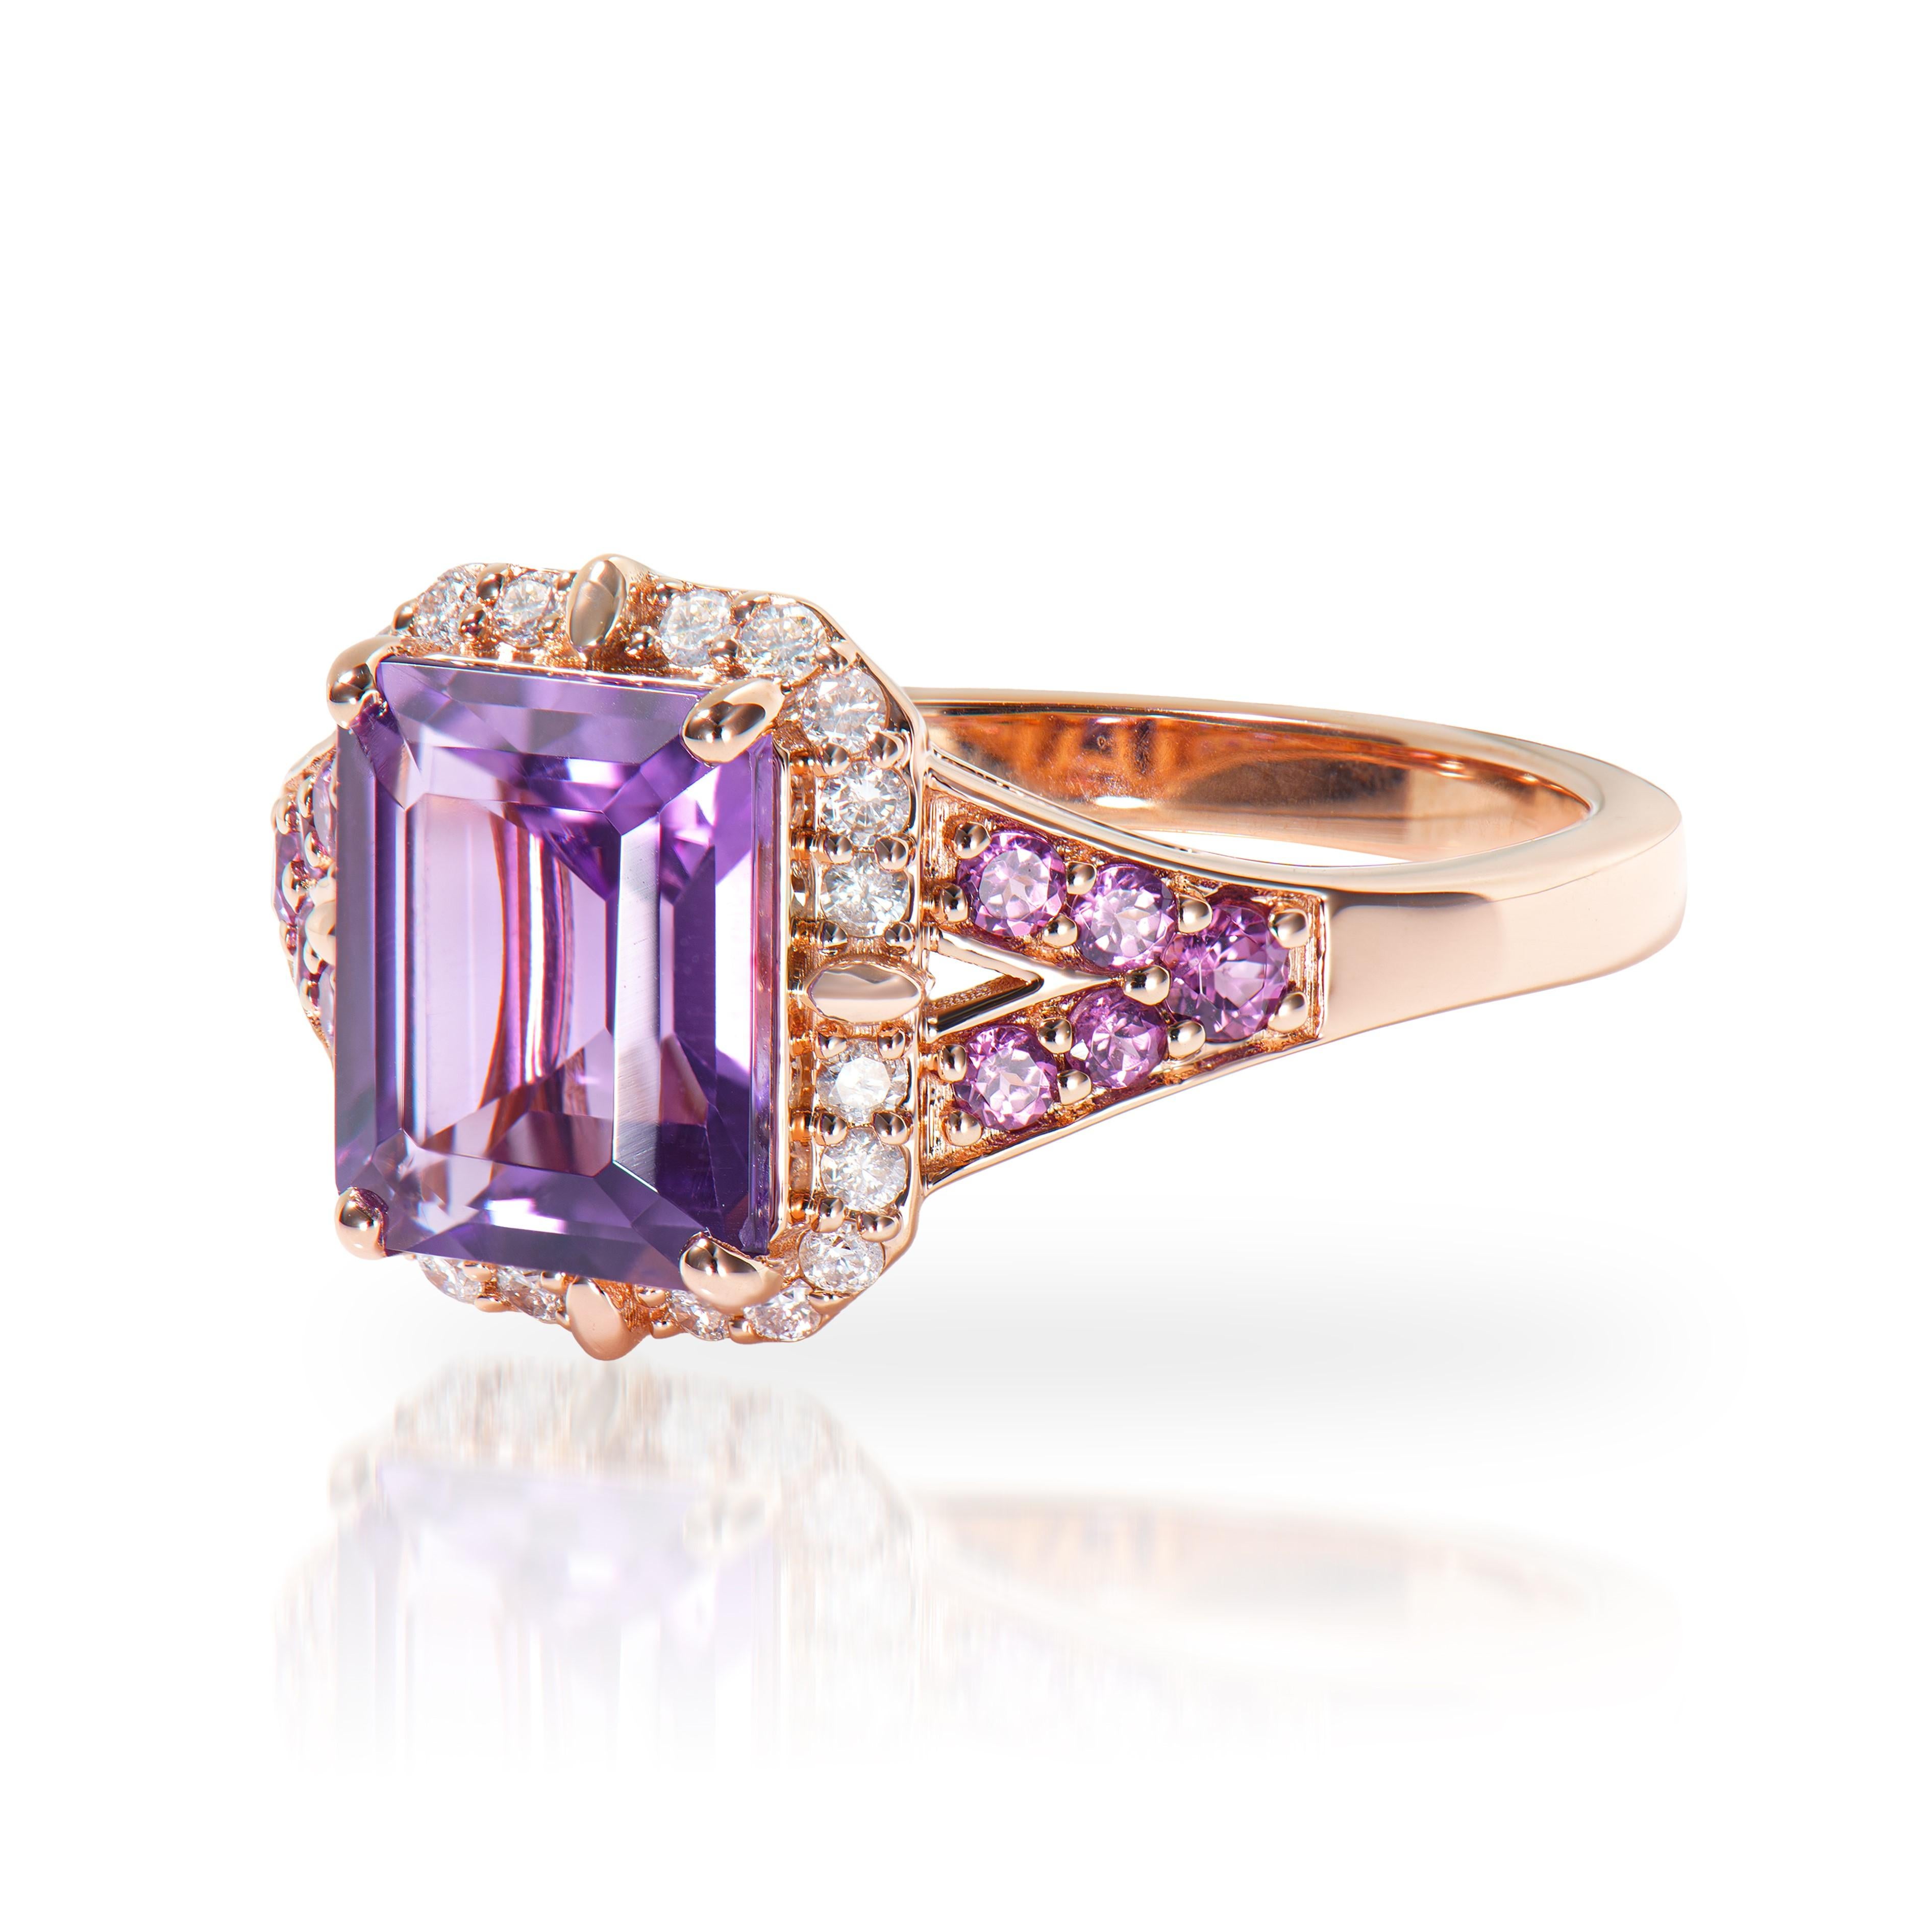 Cushion Cut 2.21 Carat Amethyst Fancy Ring in 14KRG with Rhodolite and White Diamond.   For Sale